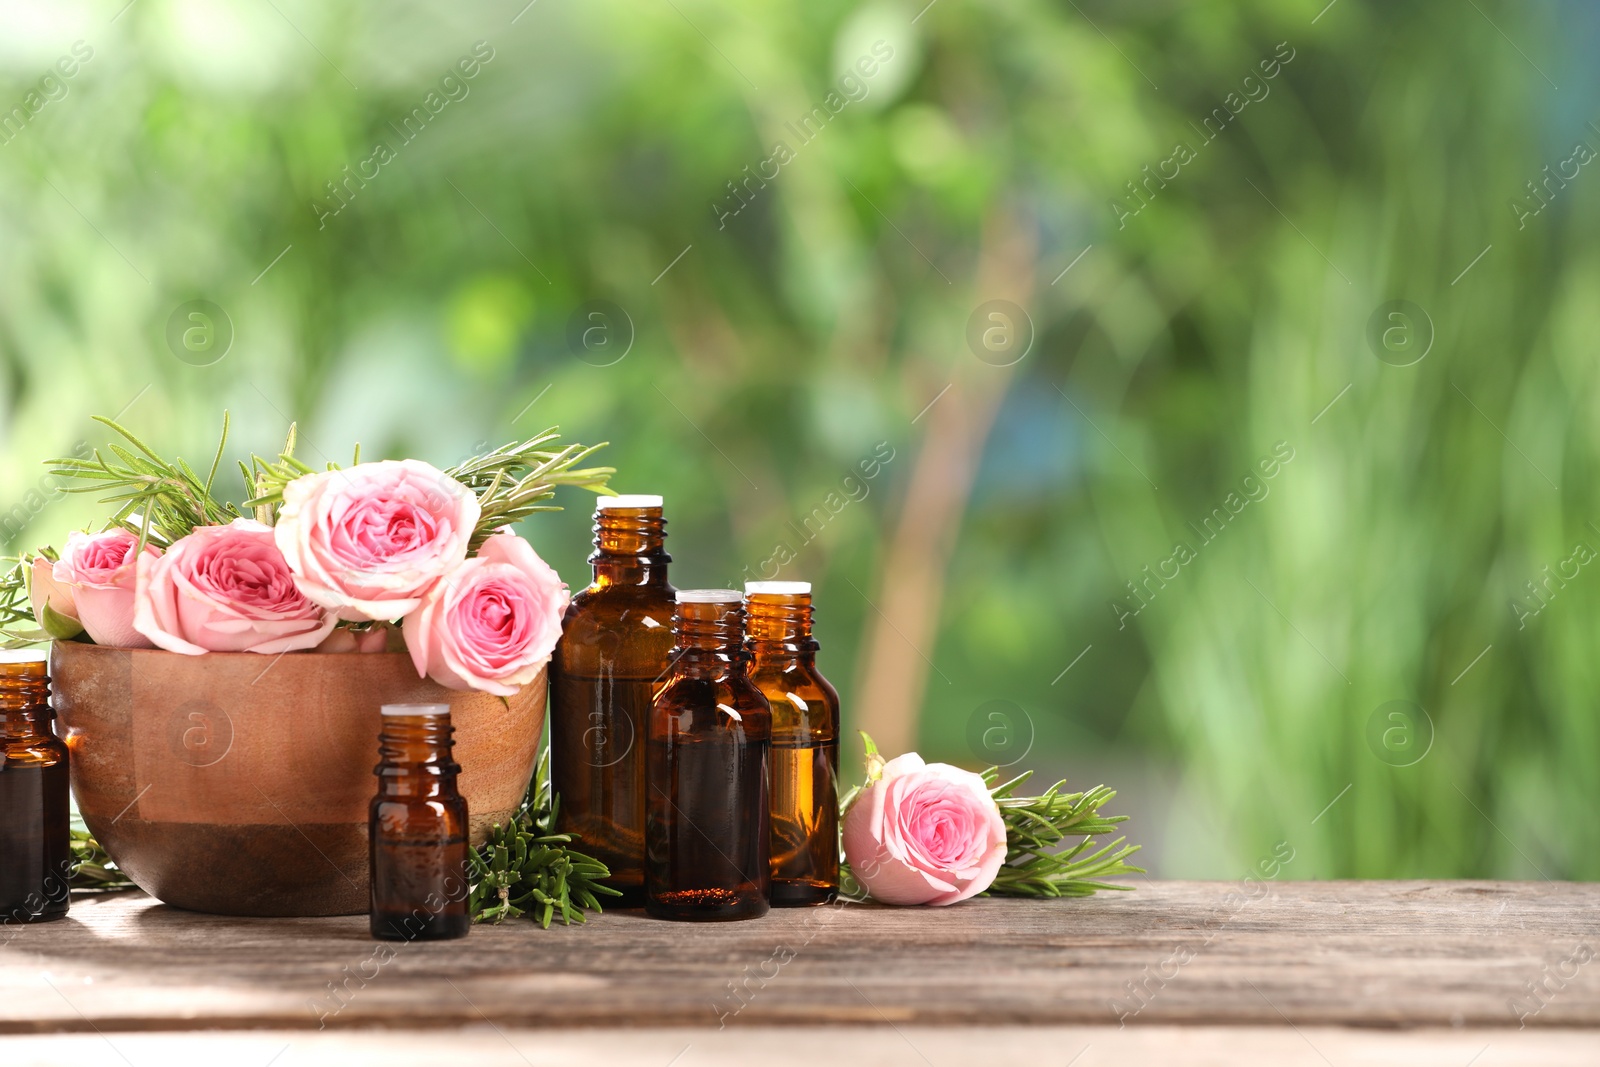 Photo of Bottles with essential oils, roses and rosemary on wooden table against blurred green background. Space for text